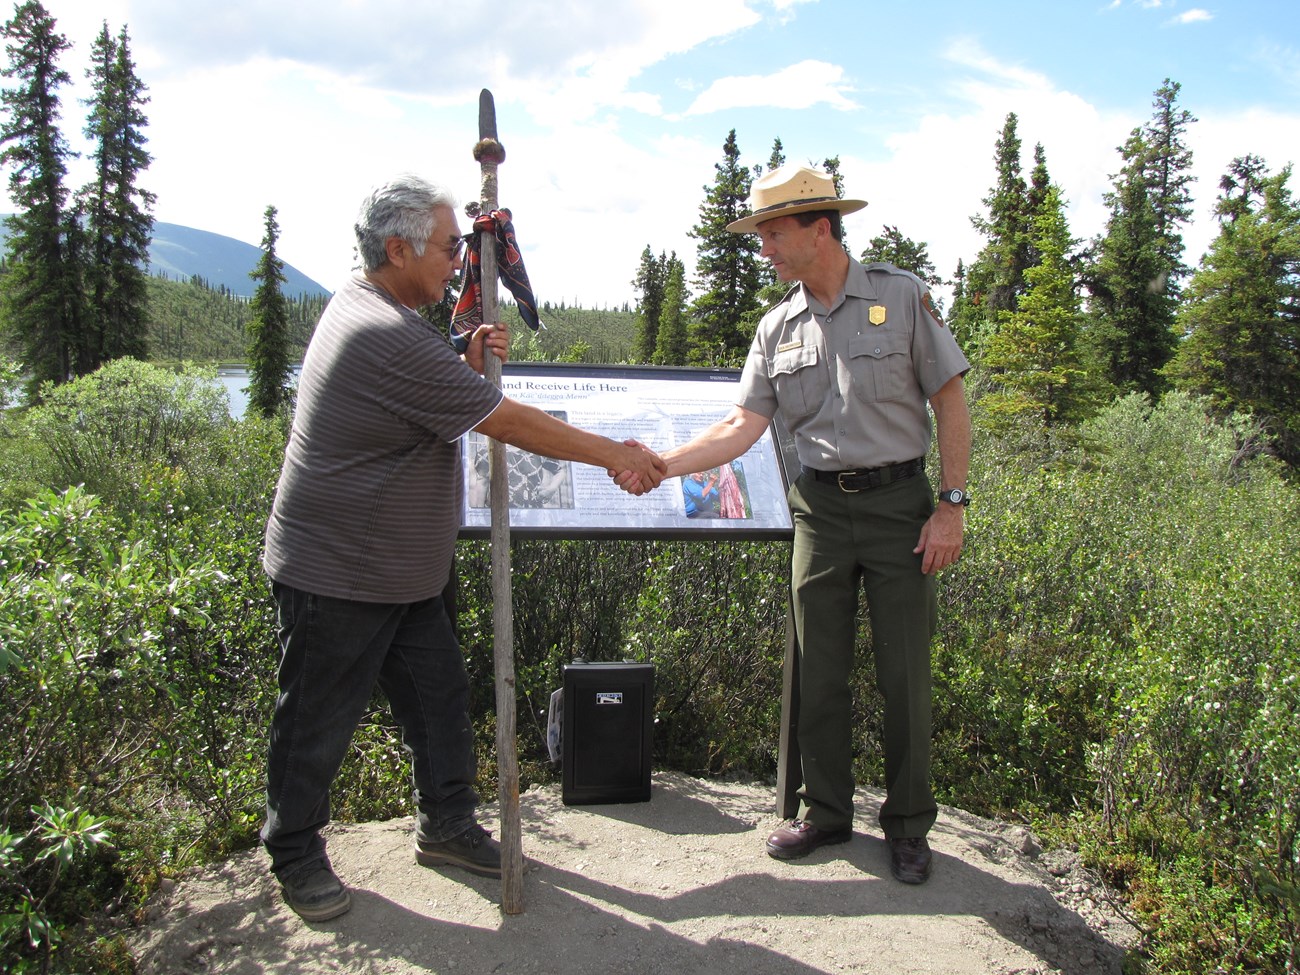 a park ranger shakes hands with a local man during a campground dedication